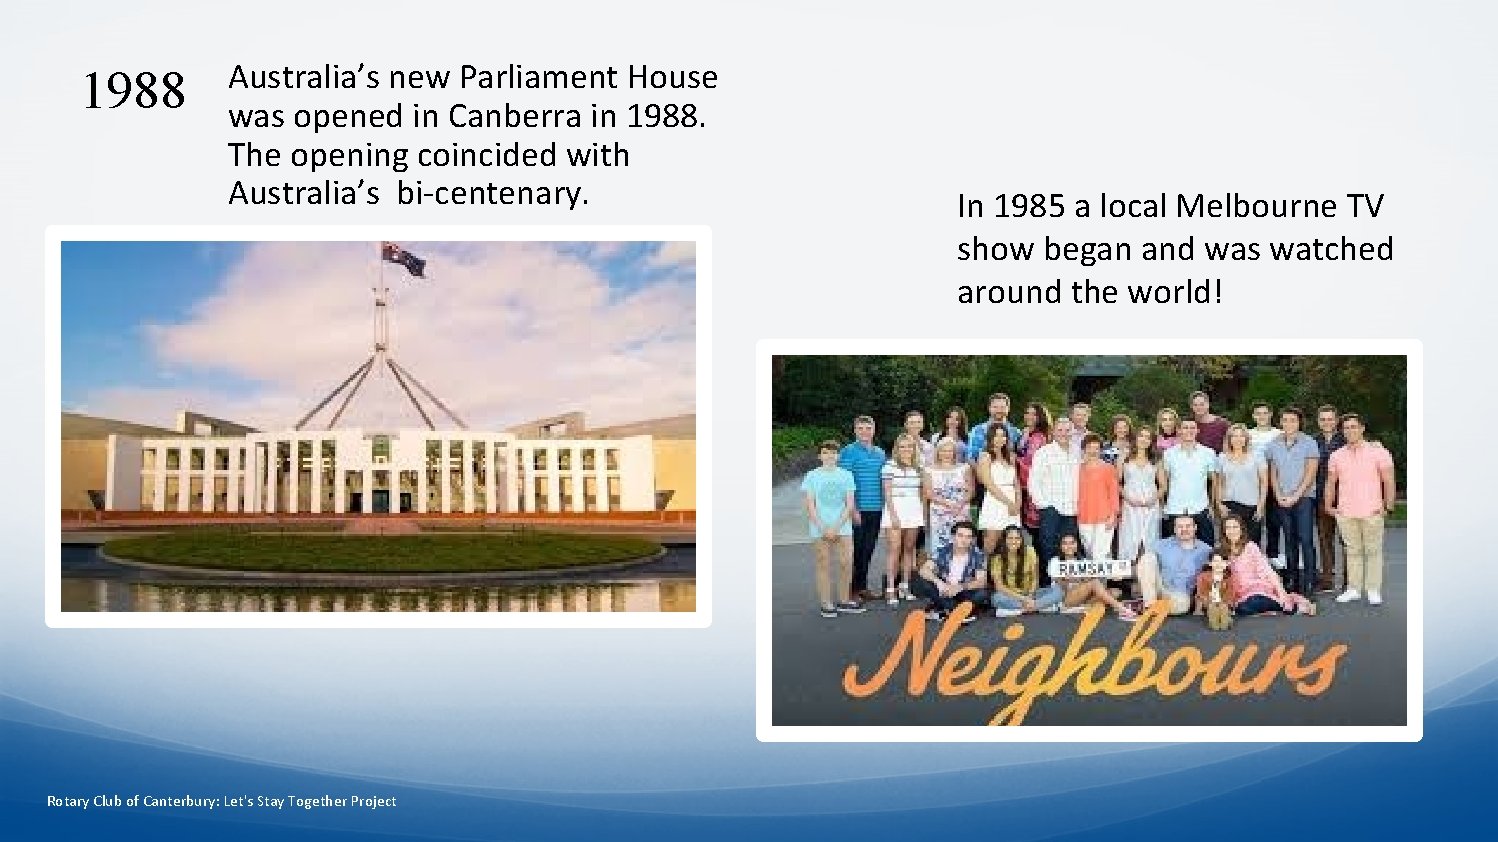 1988 Australia’s new Parliament House was opened in Canberra in 1988. The opening coincided